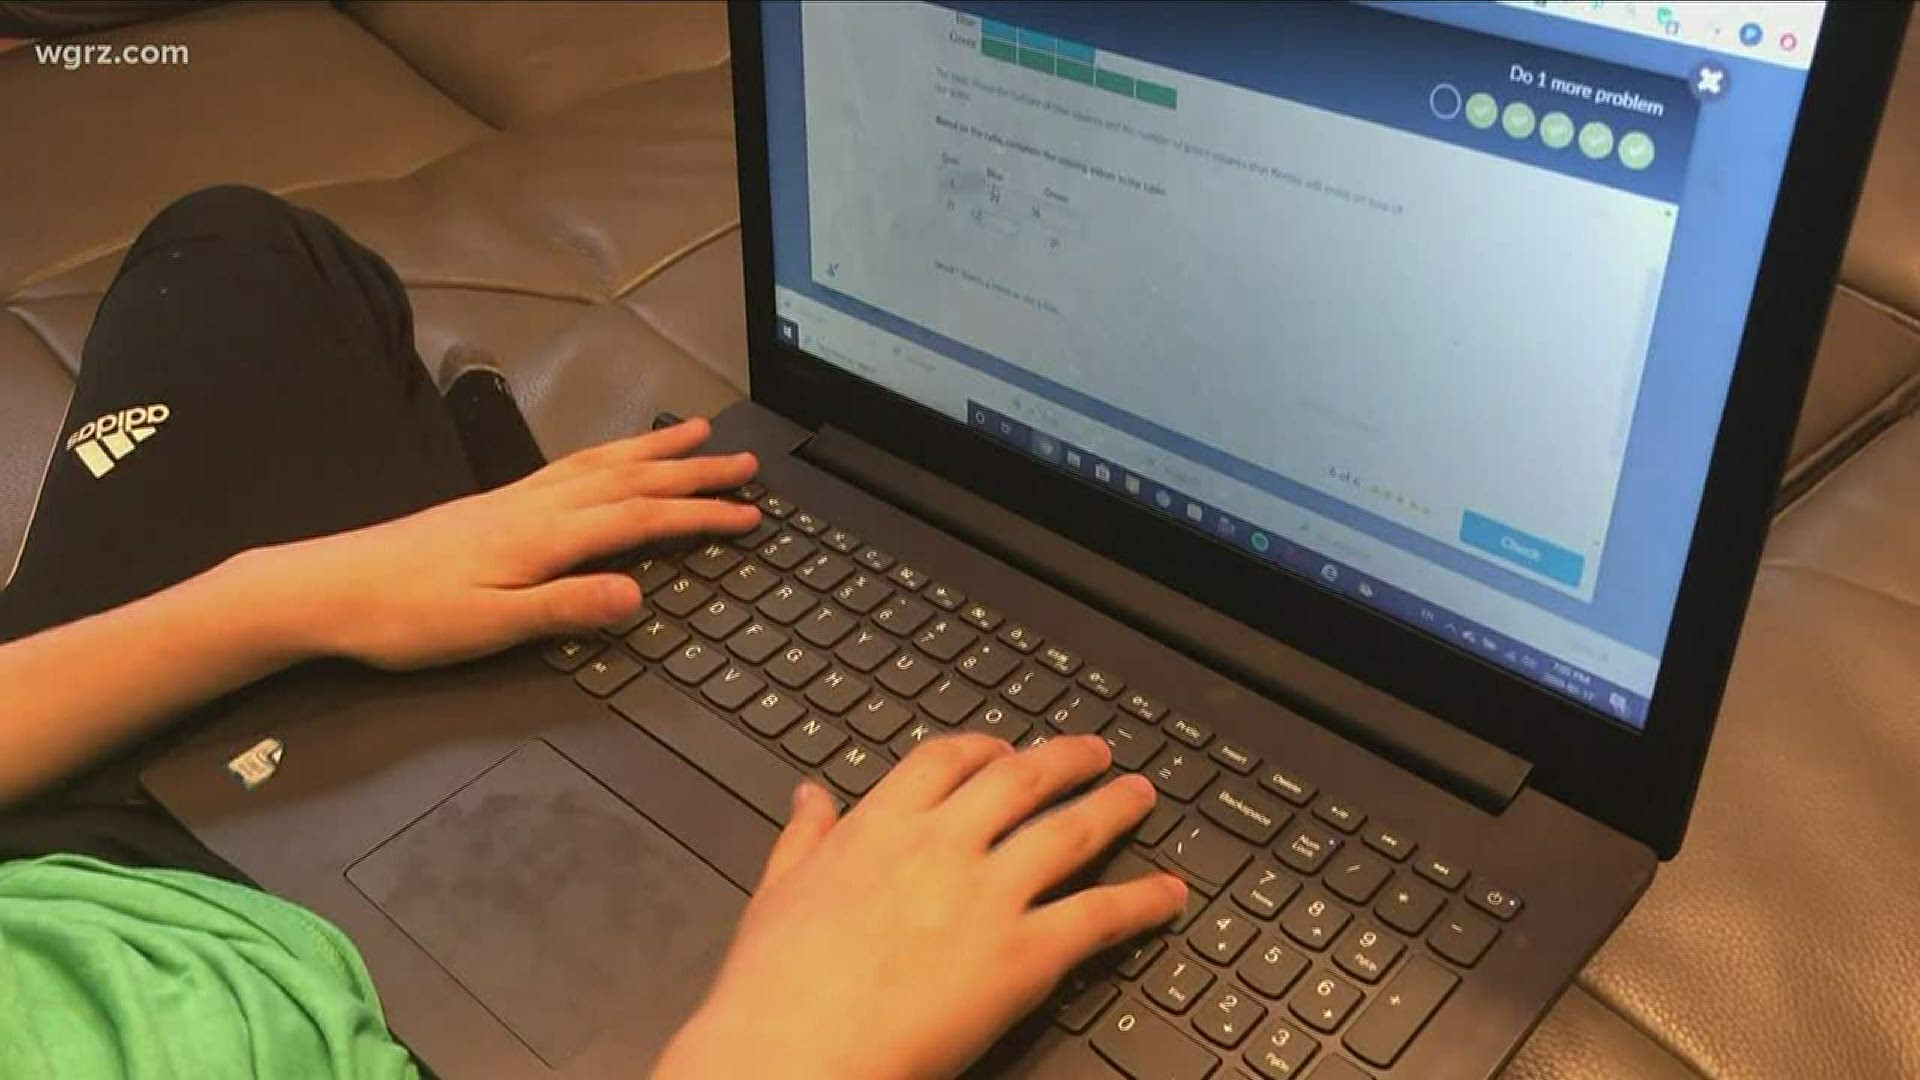 For the past month and a half, Buffalo Schools has been issuing laptops to students, who don't have computer access.